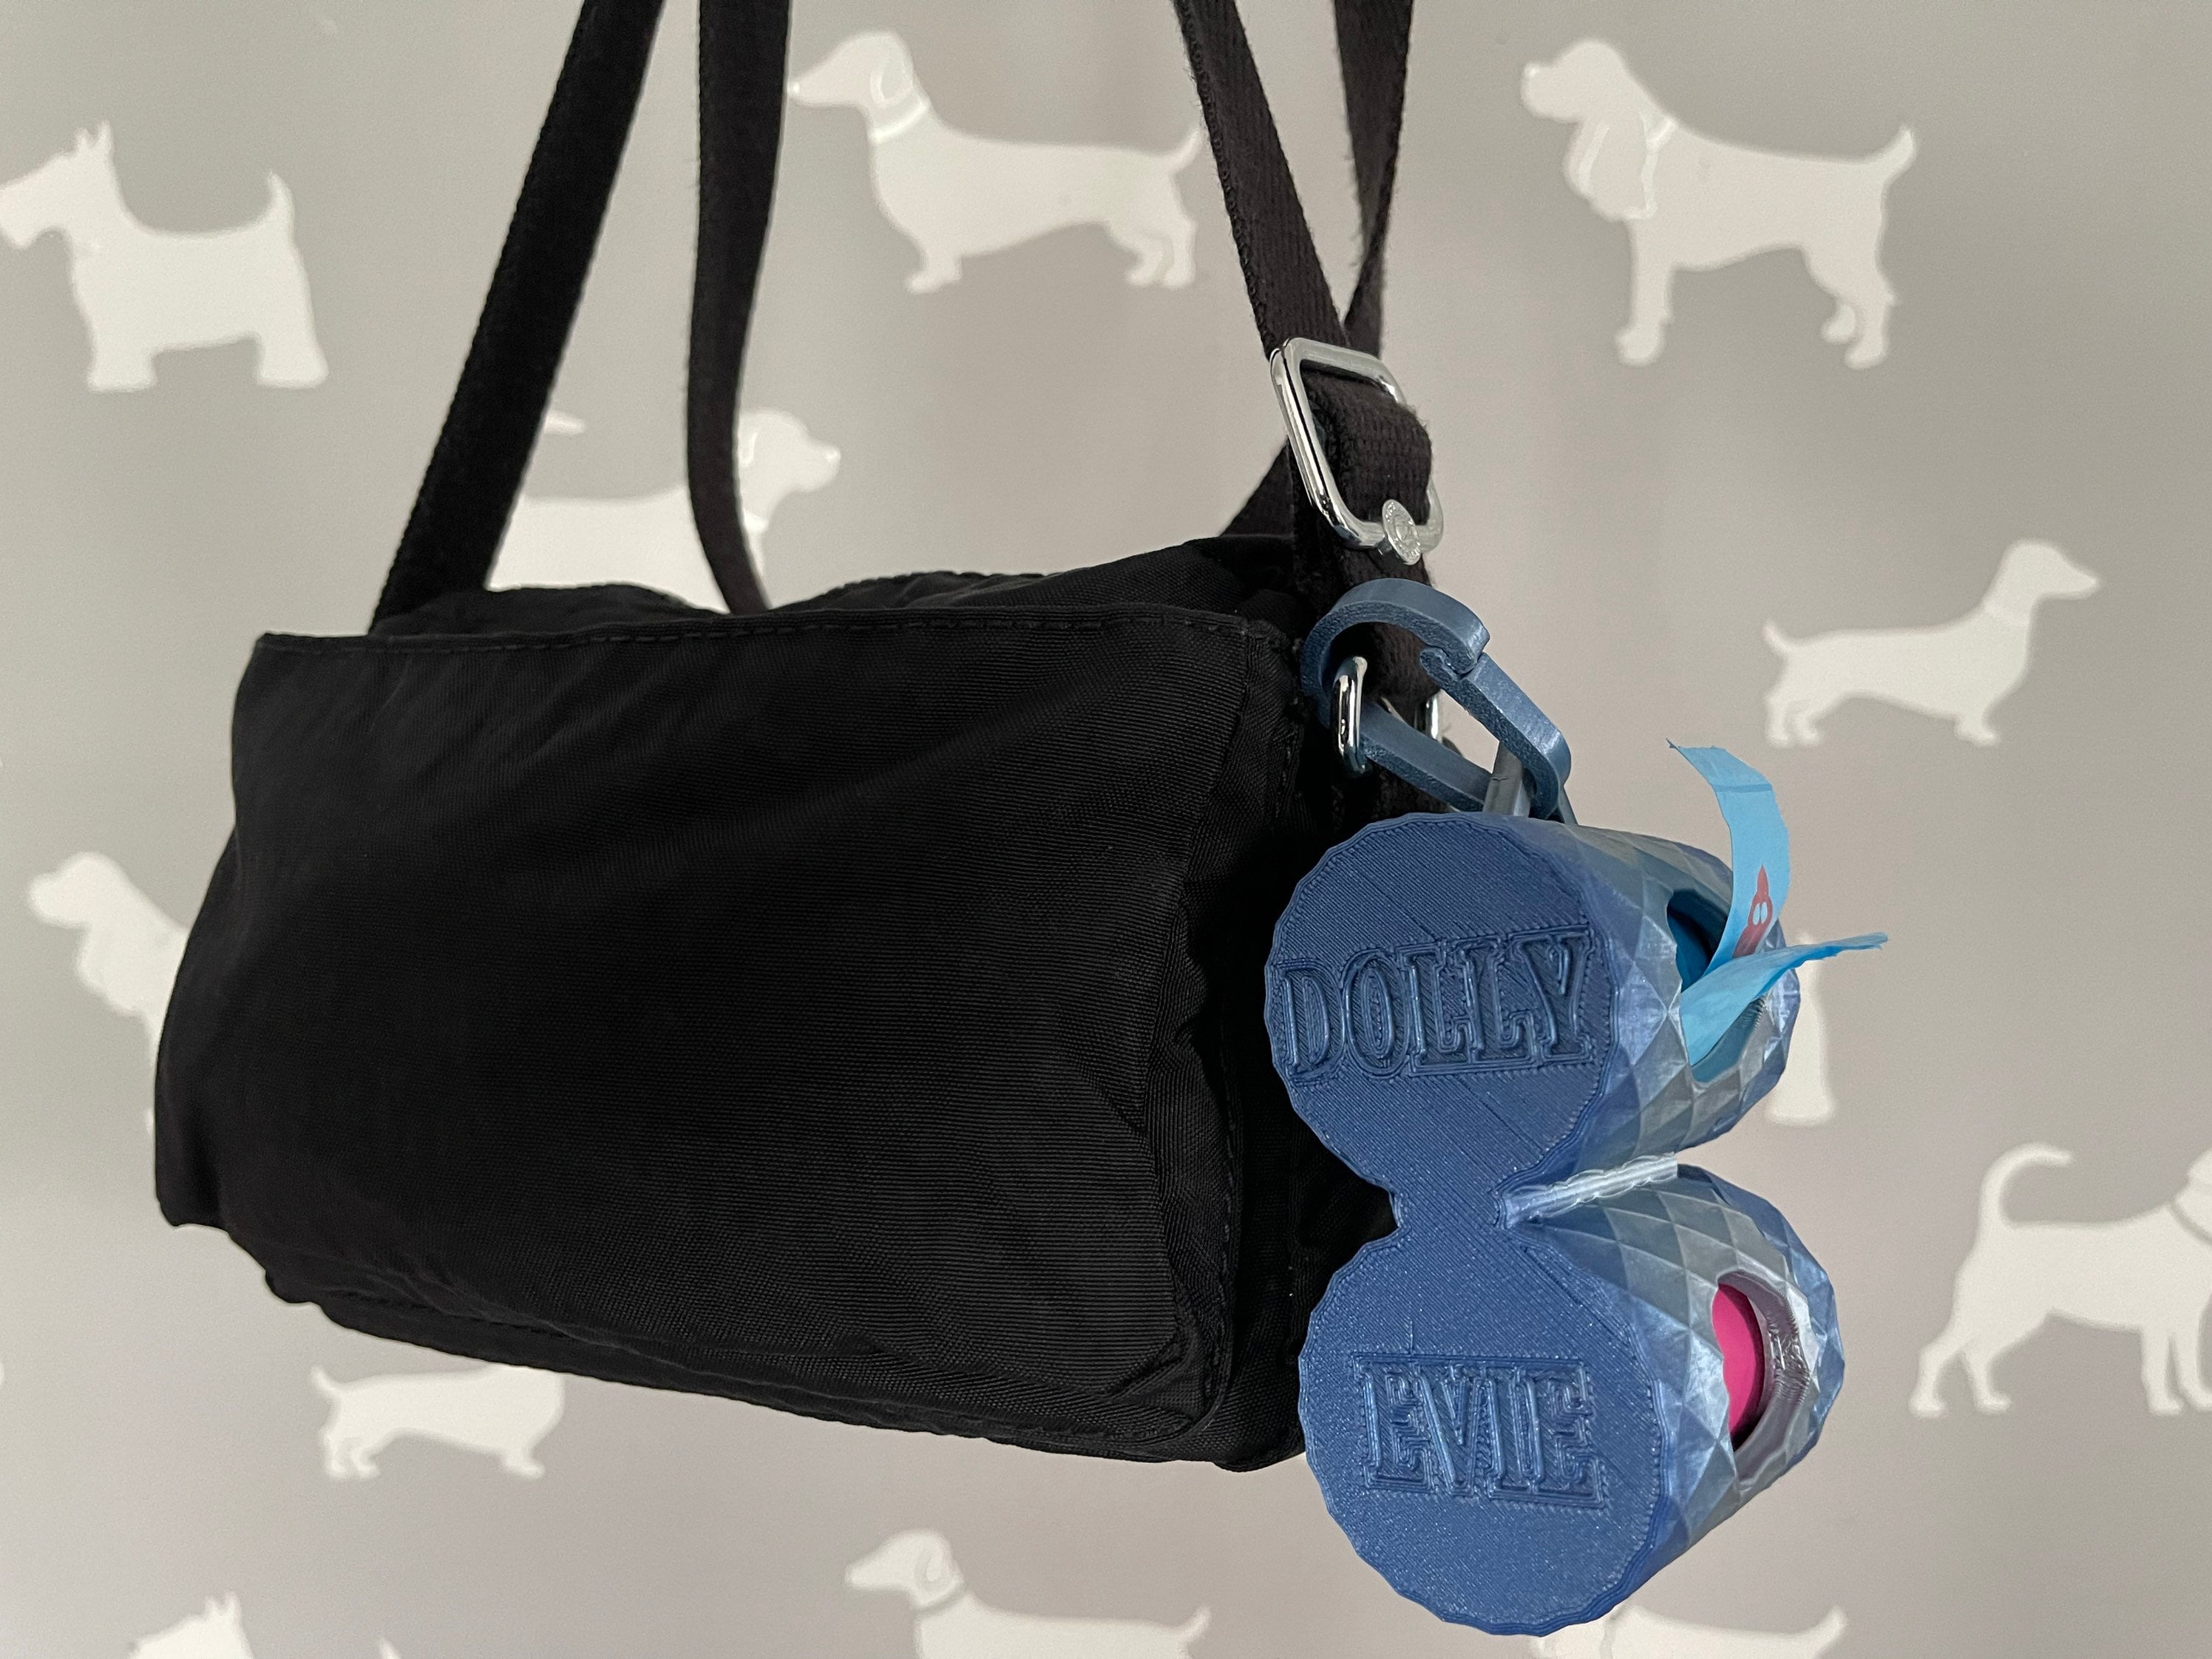  chusike Poop Bag Holders for Leashes, Navy Blue, Poop Bag  Dispenser for Leash, Dog Waste Bag Holder, 4x1.8x2.4 : Pet Supplies